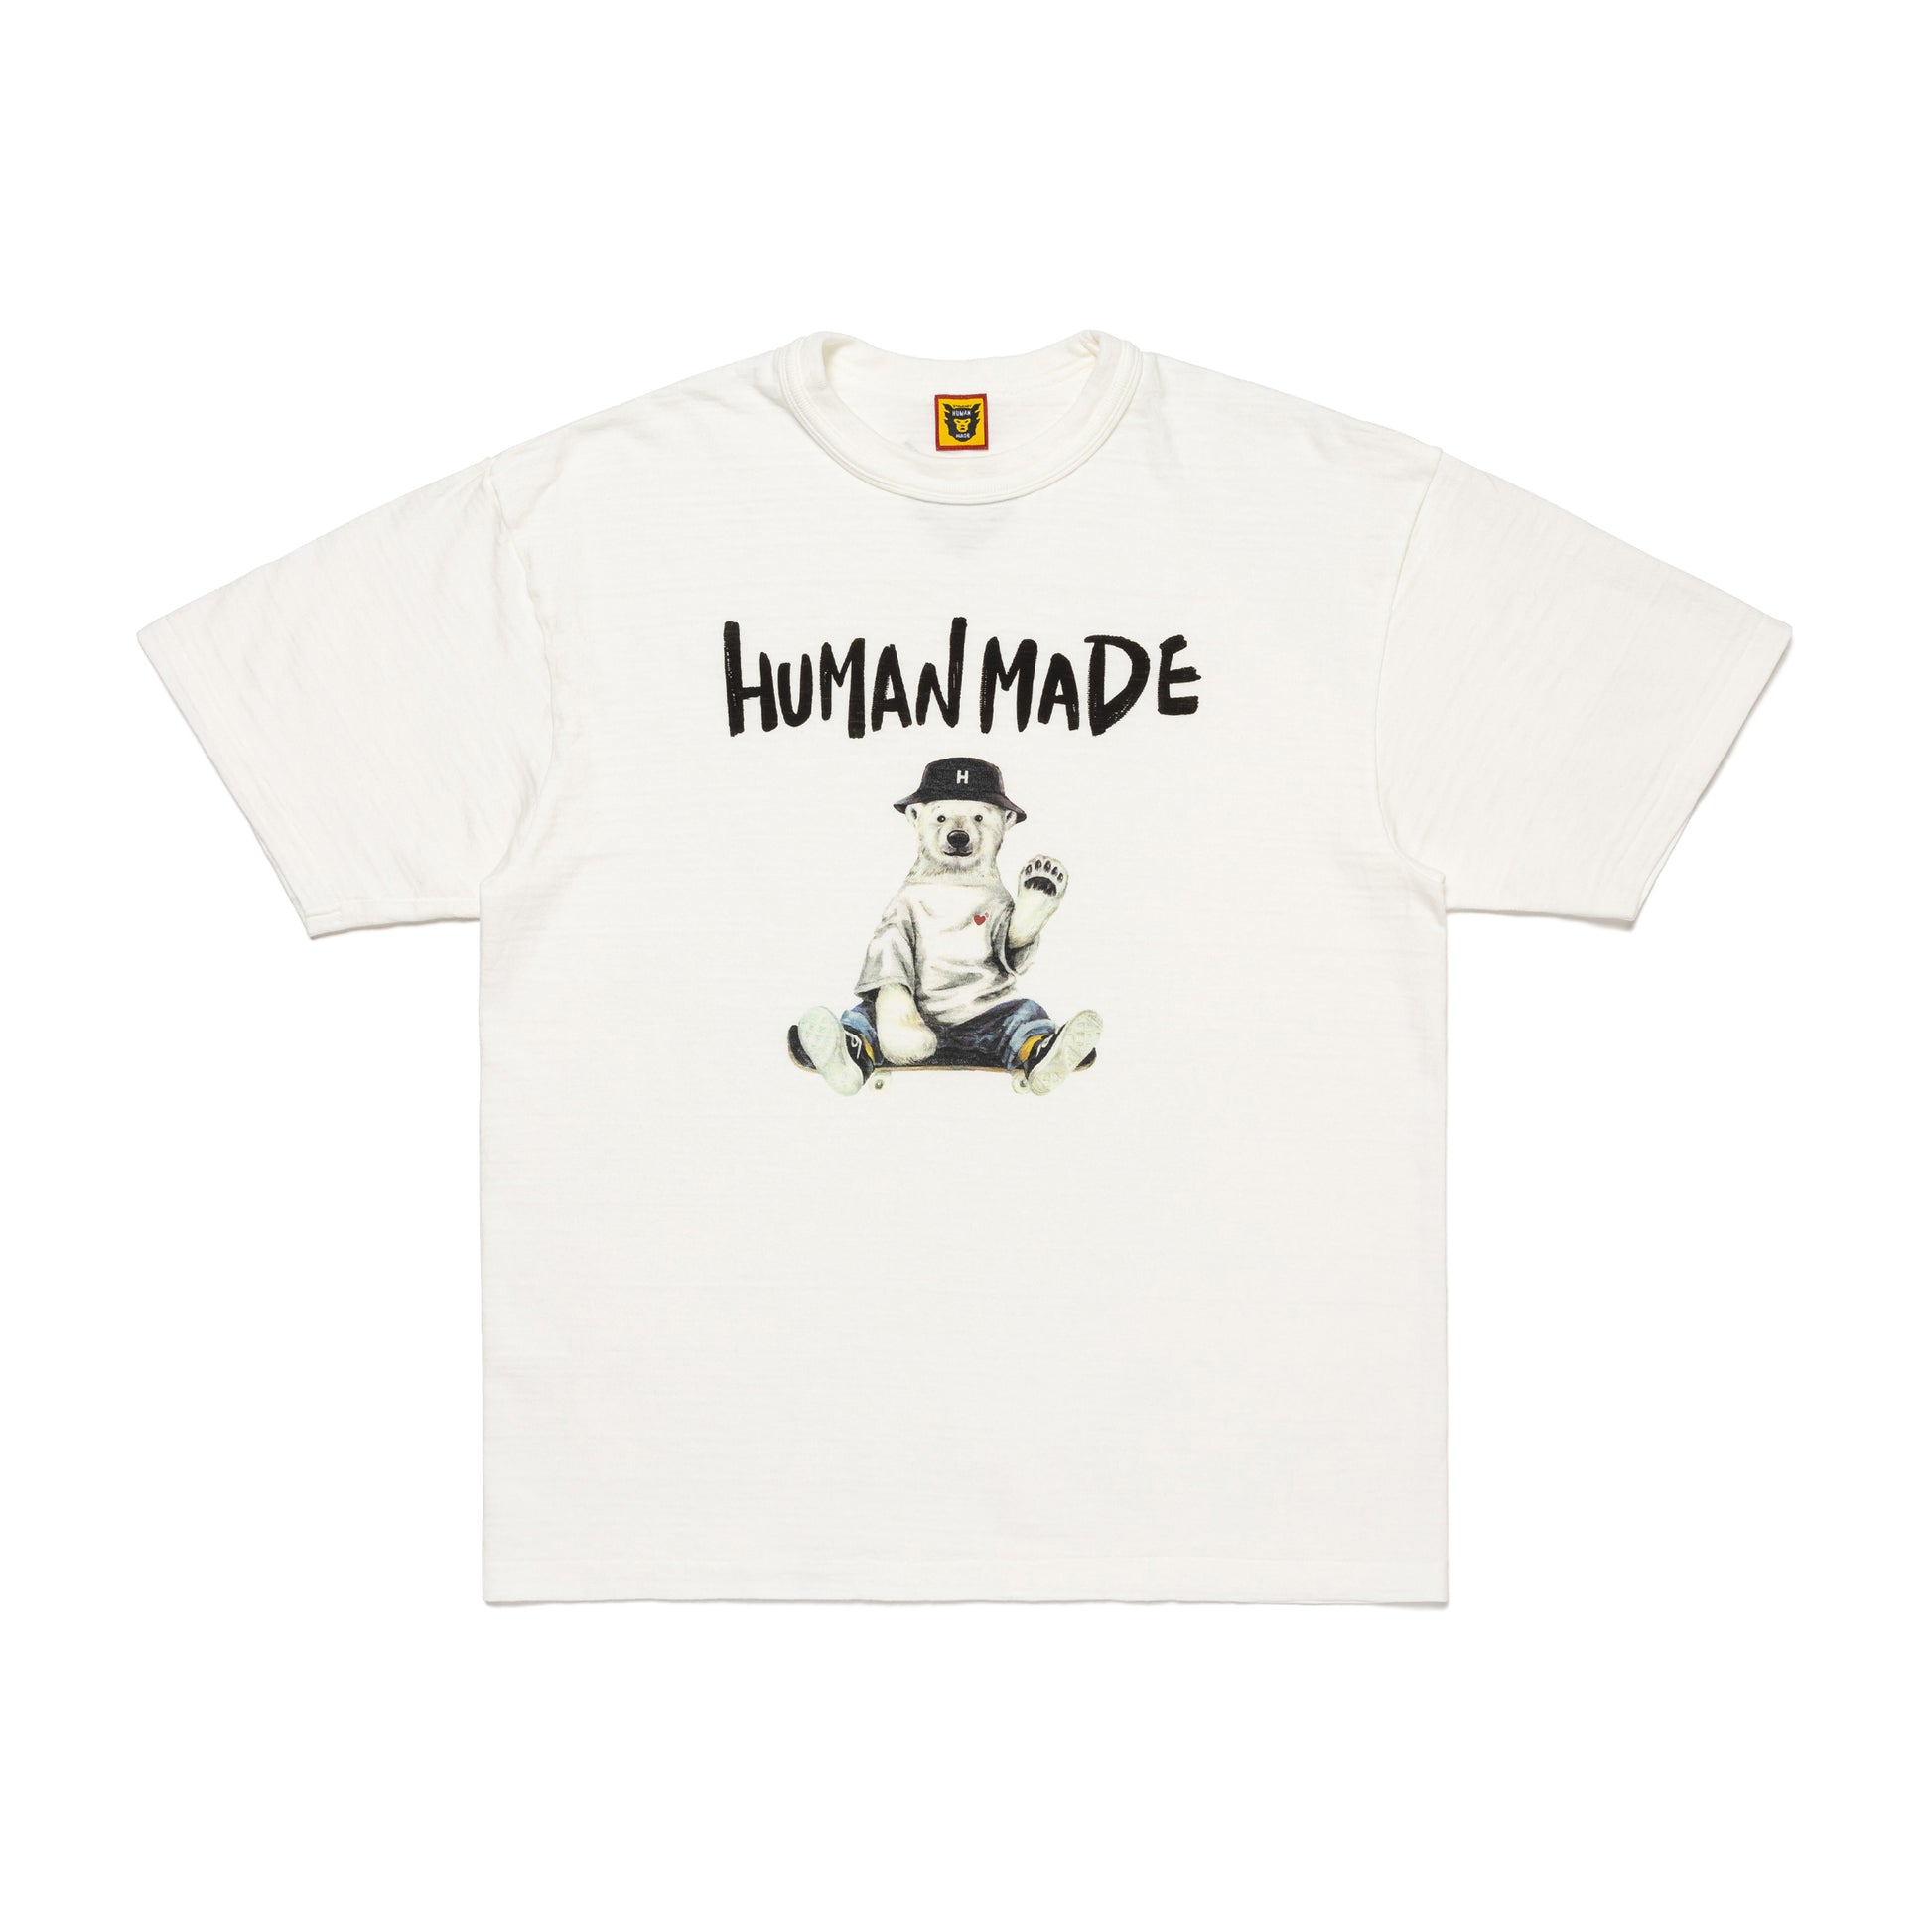 HUMAN MADE GRAPHIC T-SHIRT #16 WH-A